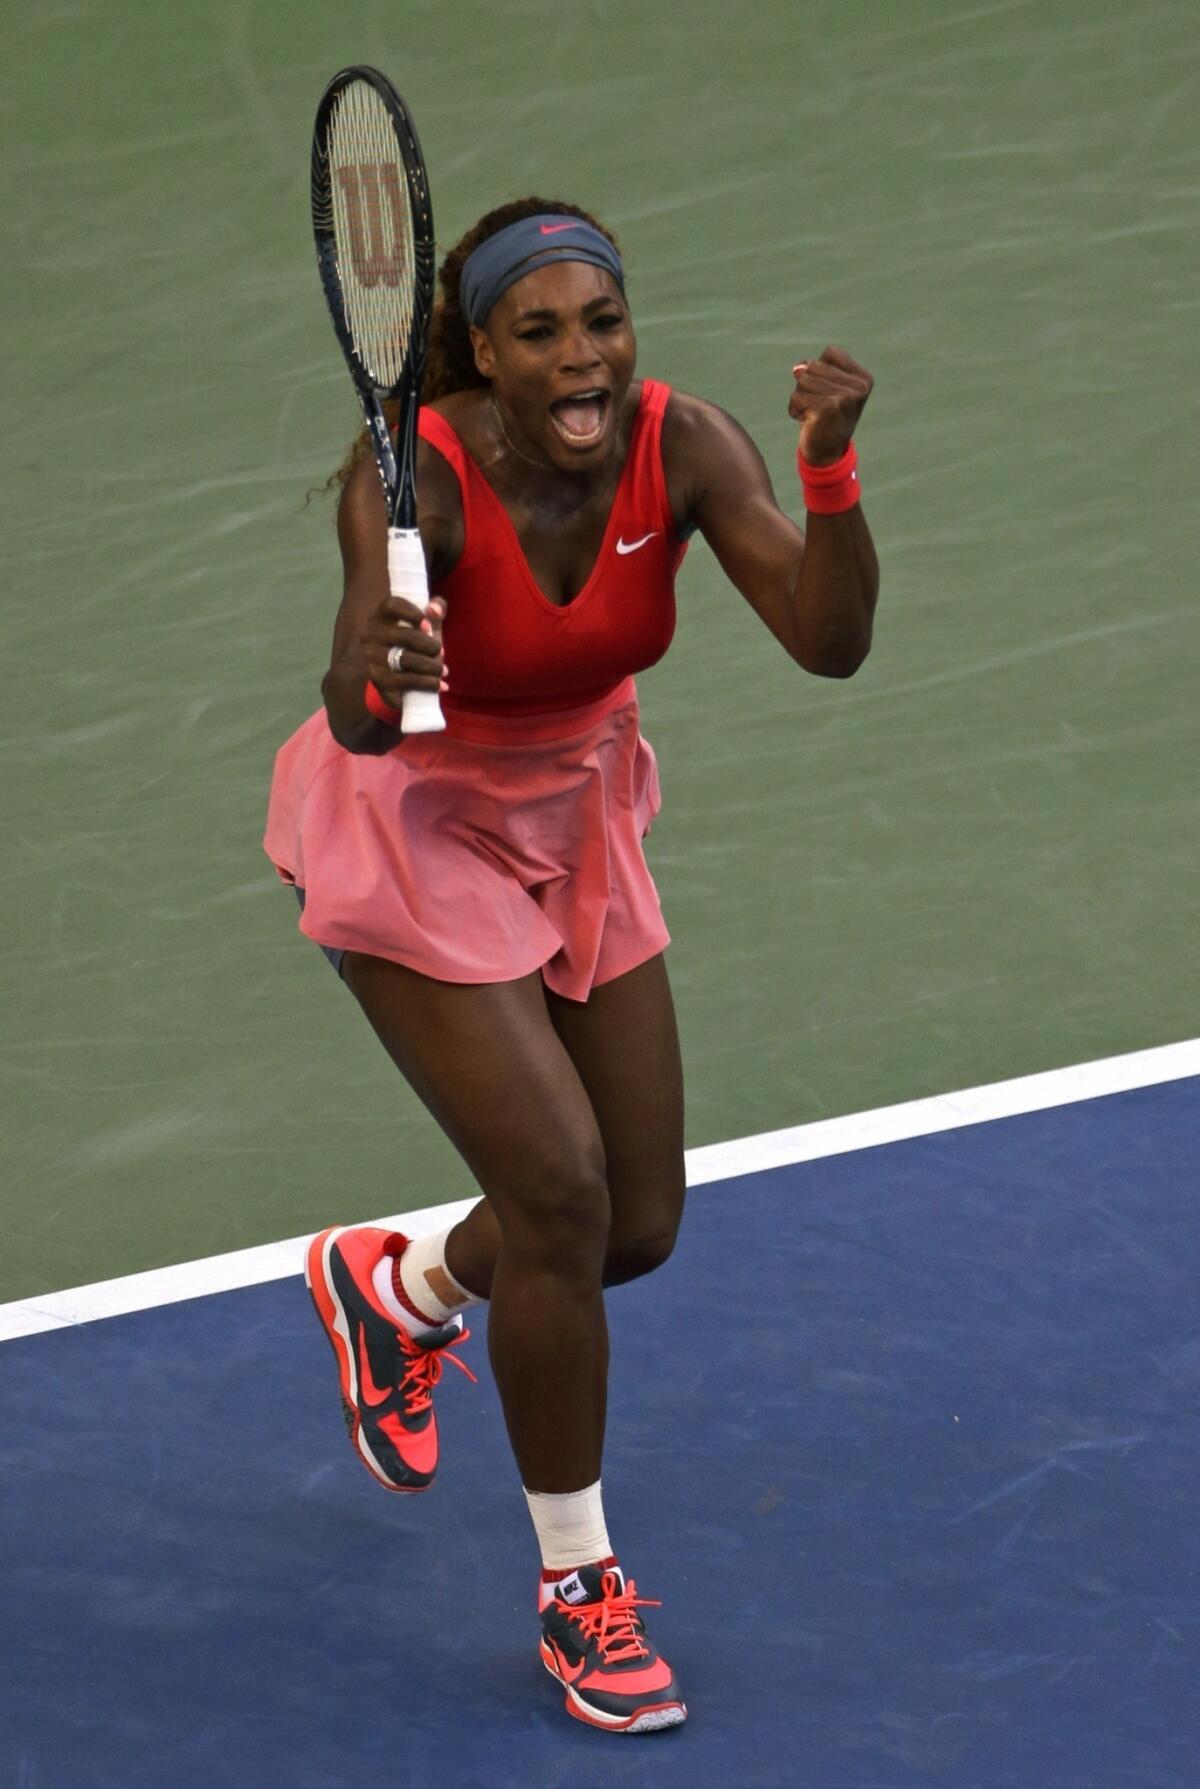 Serena Williams celebrates after defeating Li Na in the semifinals of the U.S. Open on Friday.